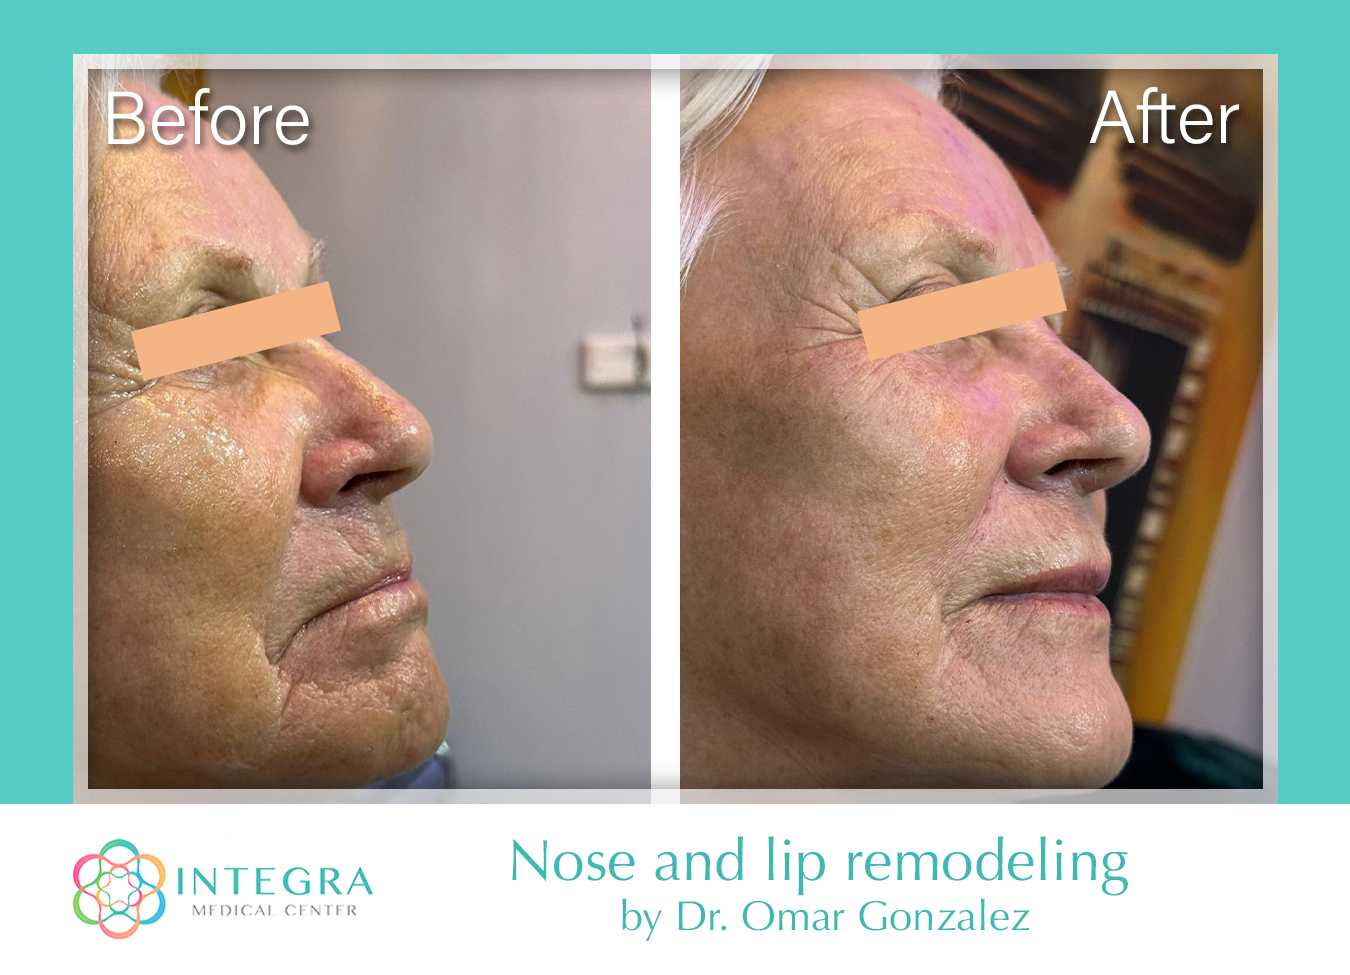 Before After - Nose and Lip Remodeling at Integra Medical Center in Nuevo Progreso, Mexico